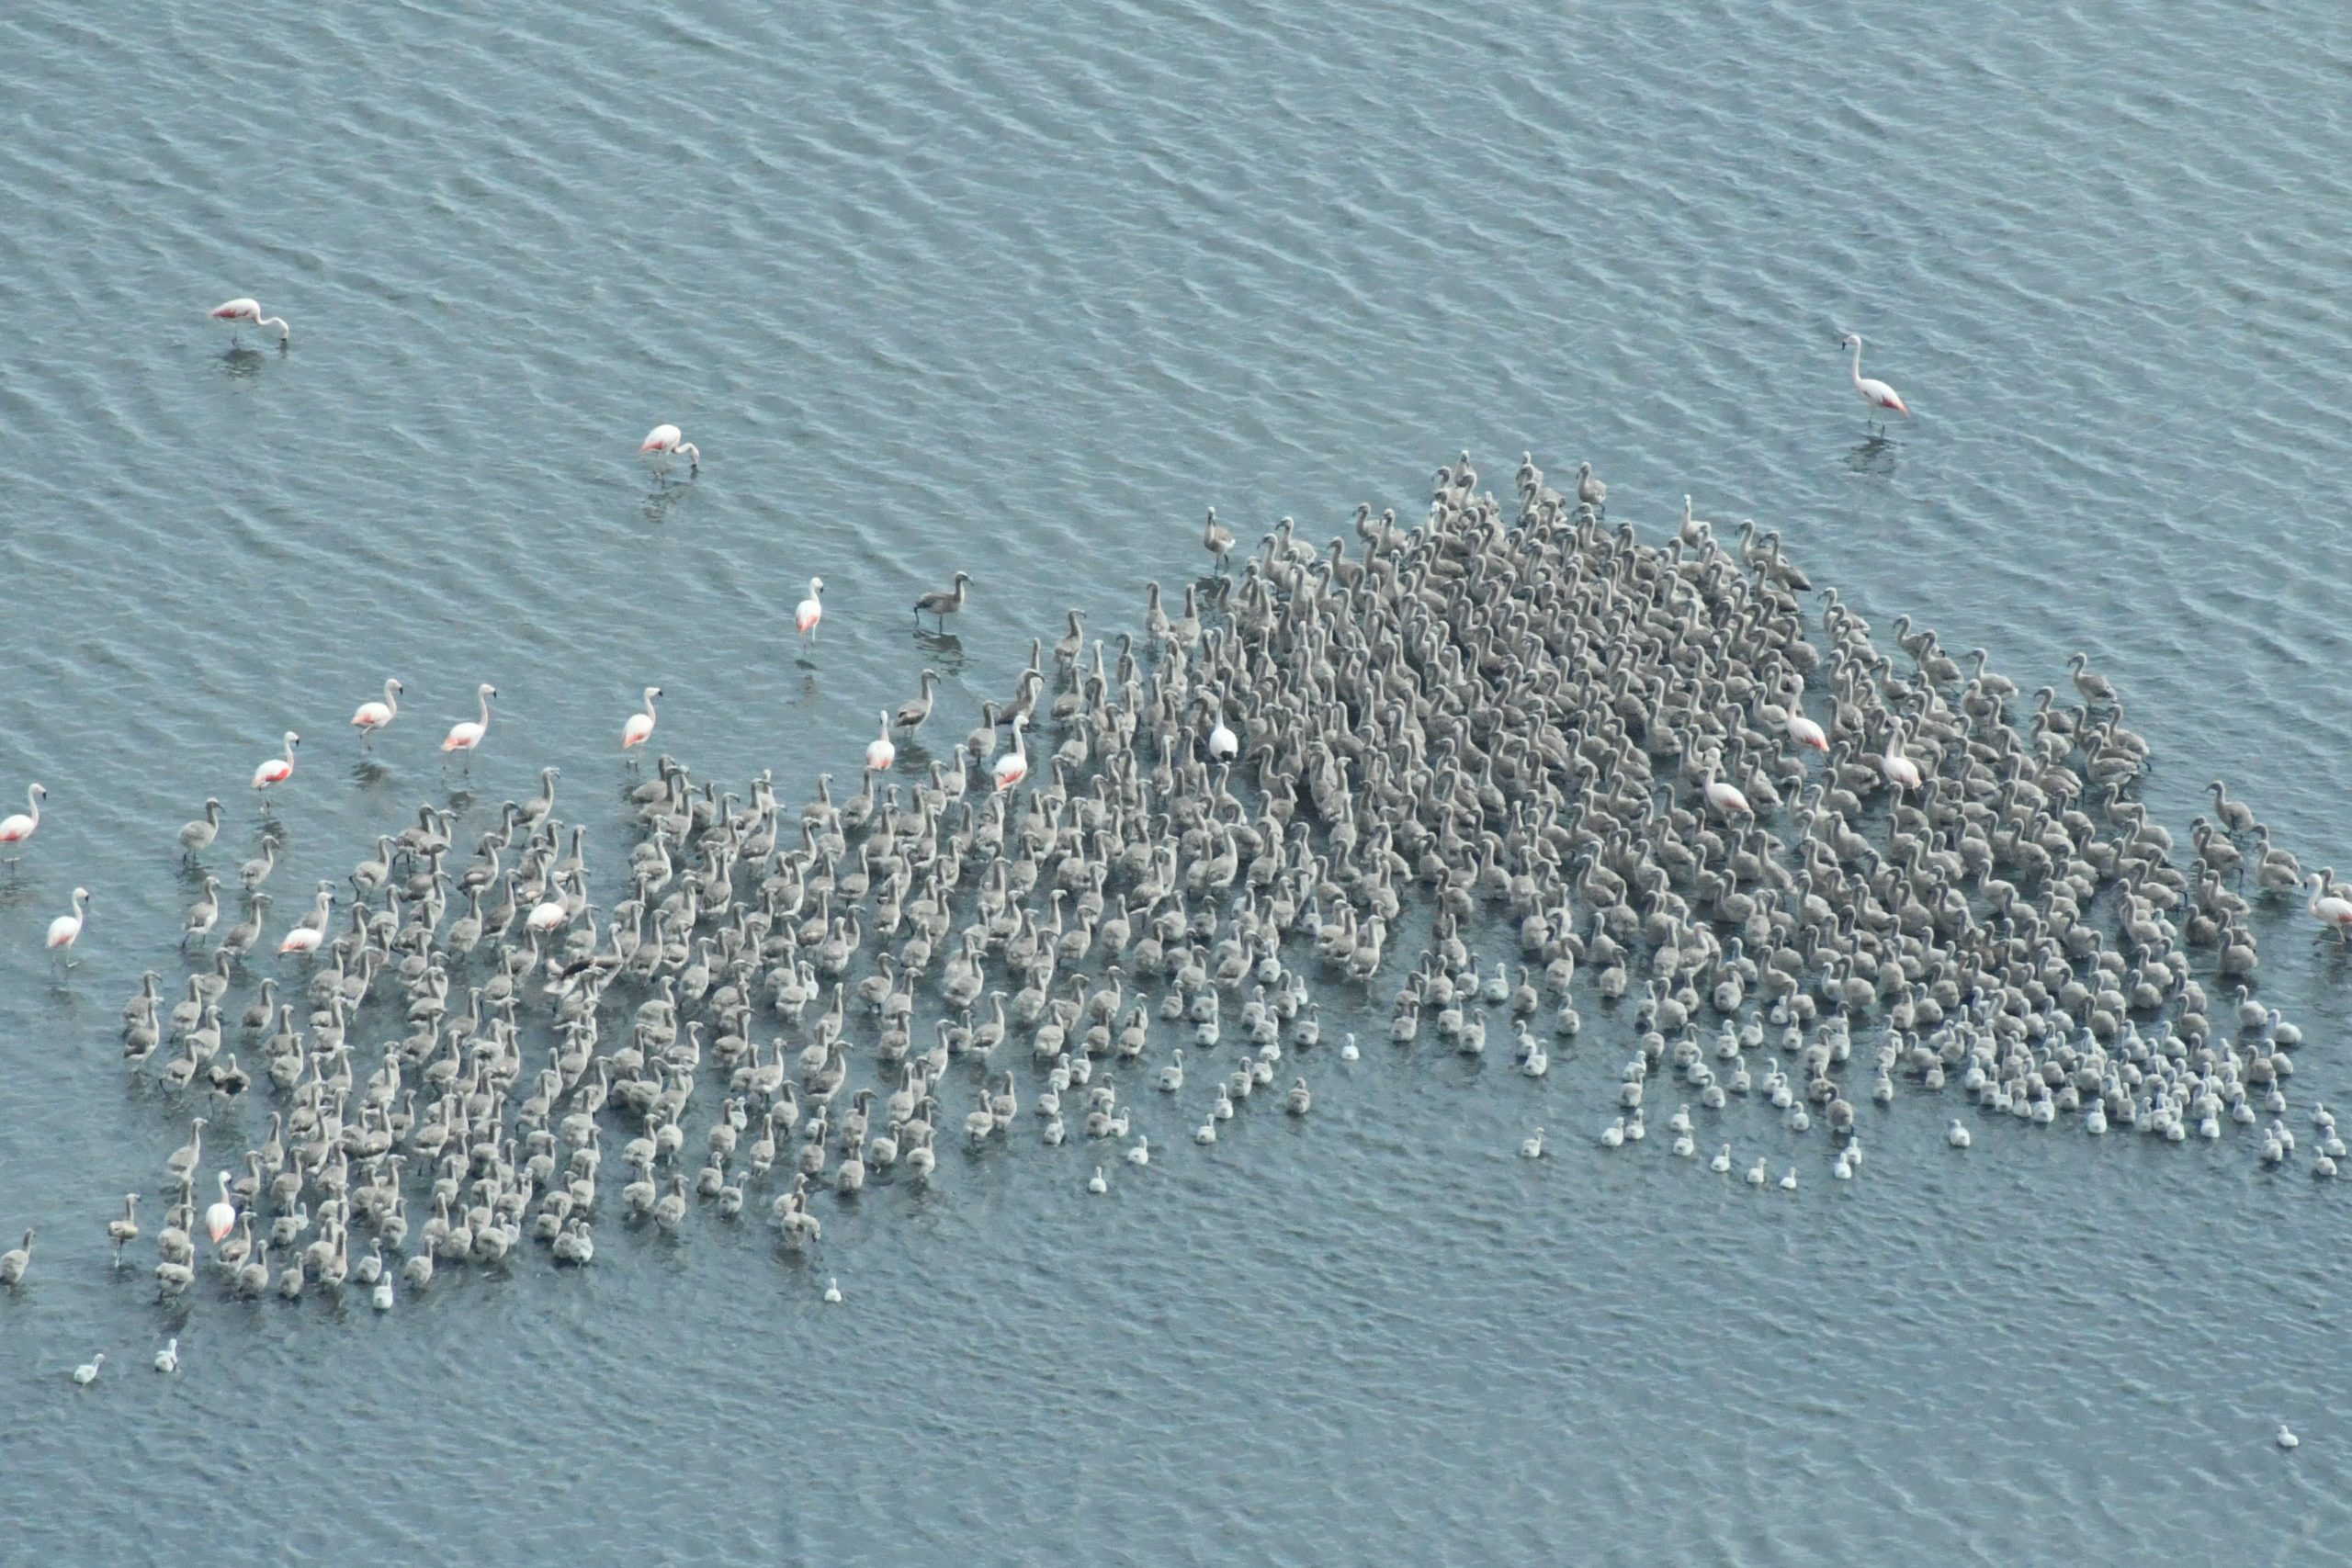 In a body of blue-gray water, pink adult flamingos stick out against their gray, more numerous, flamingo chicks